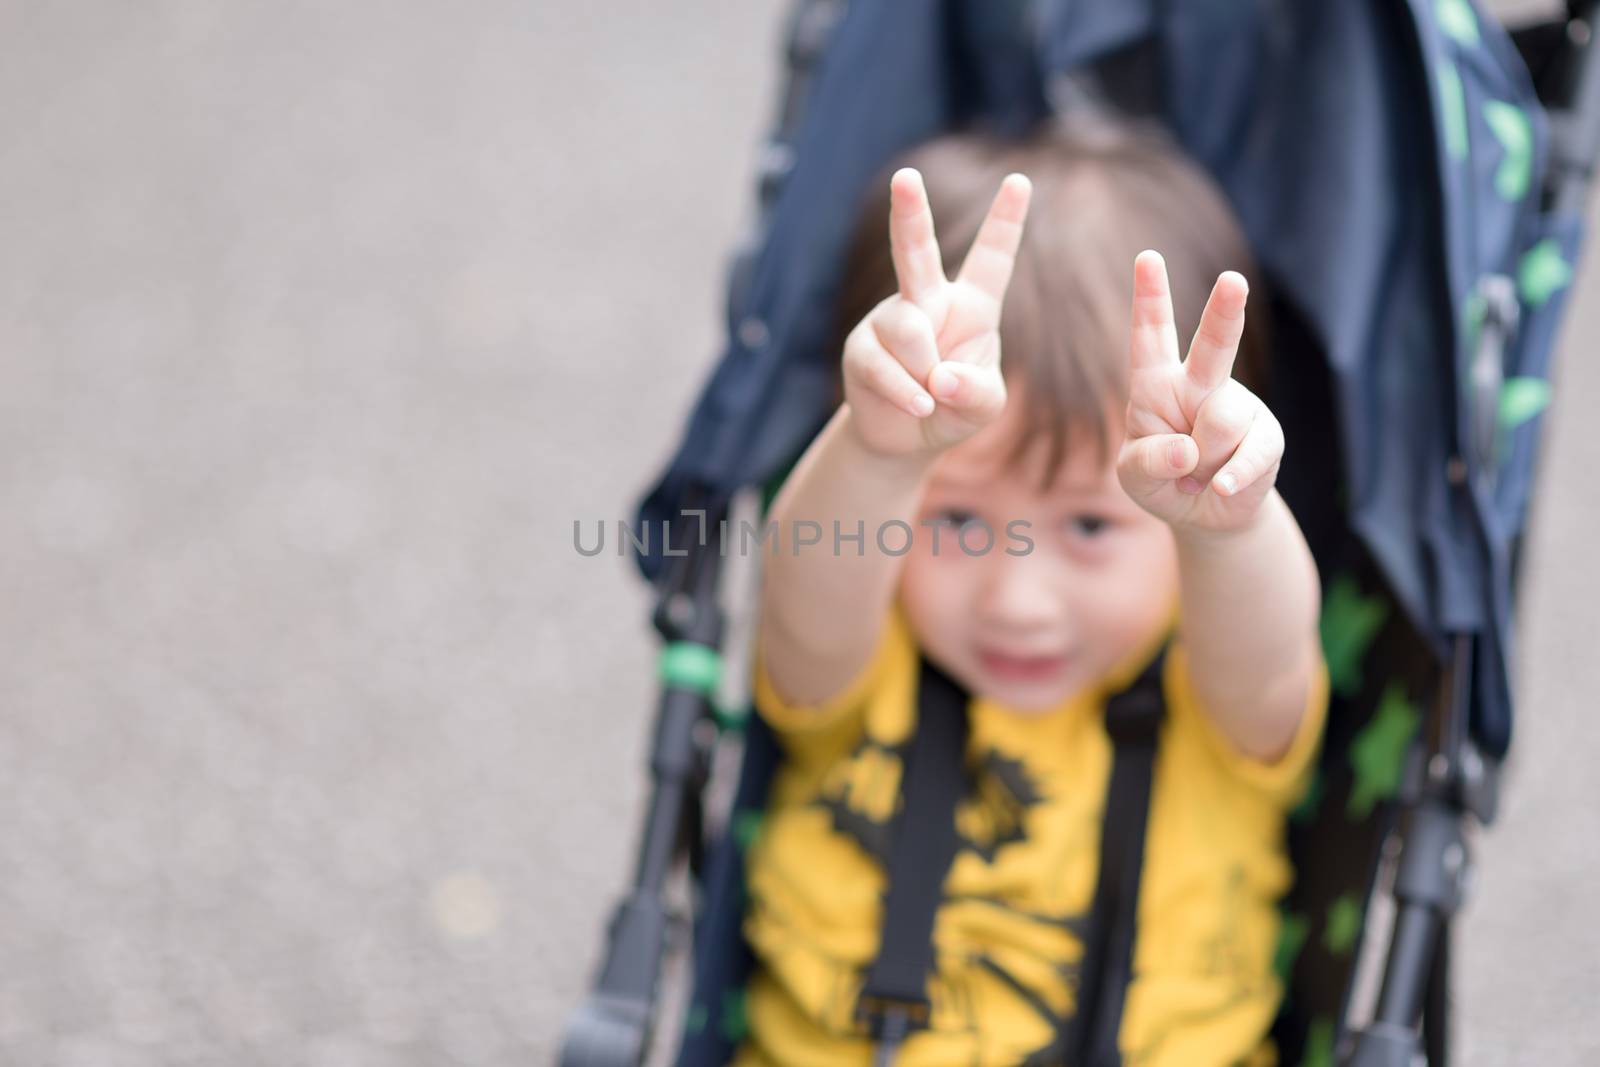 A young boy sitting in a stroller making peace signs with both hands.